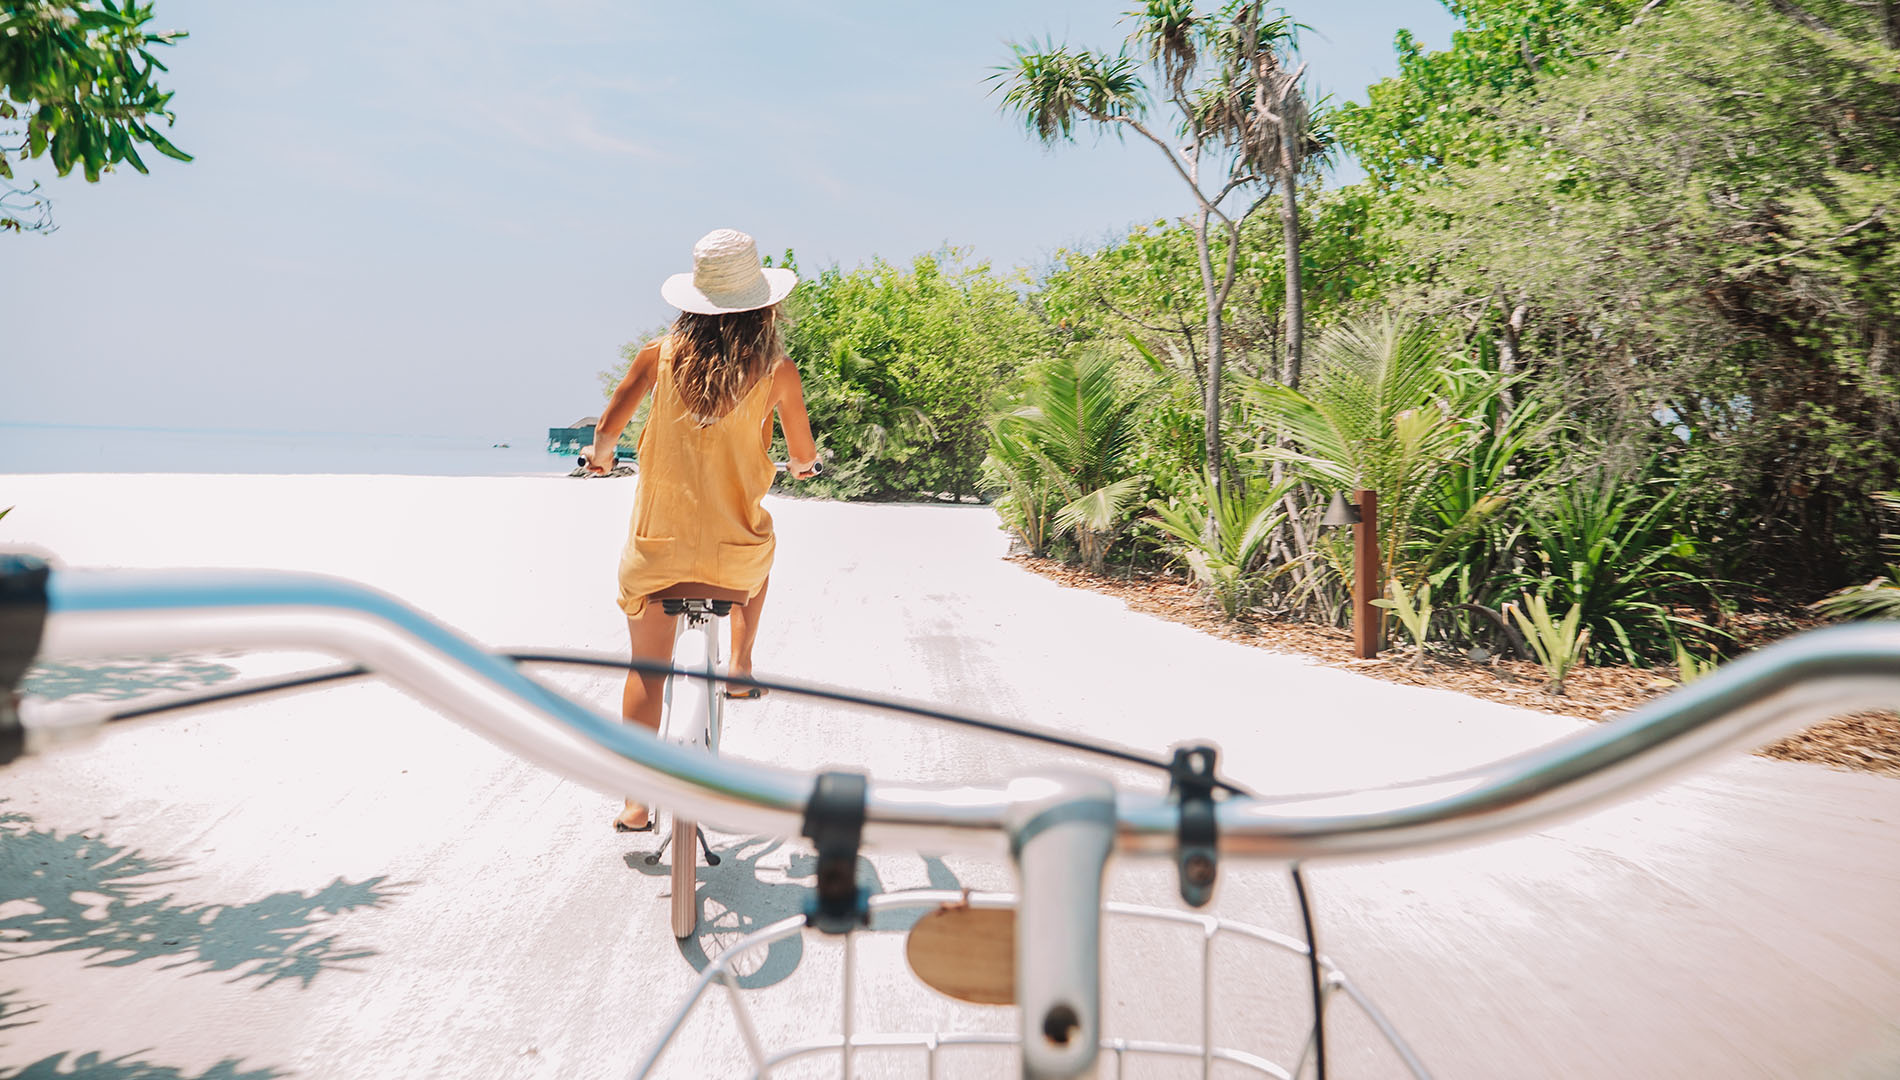 A woman bikes on a sandy trail in the Maldives